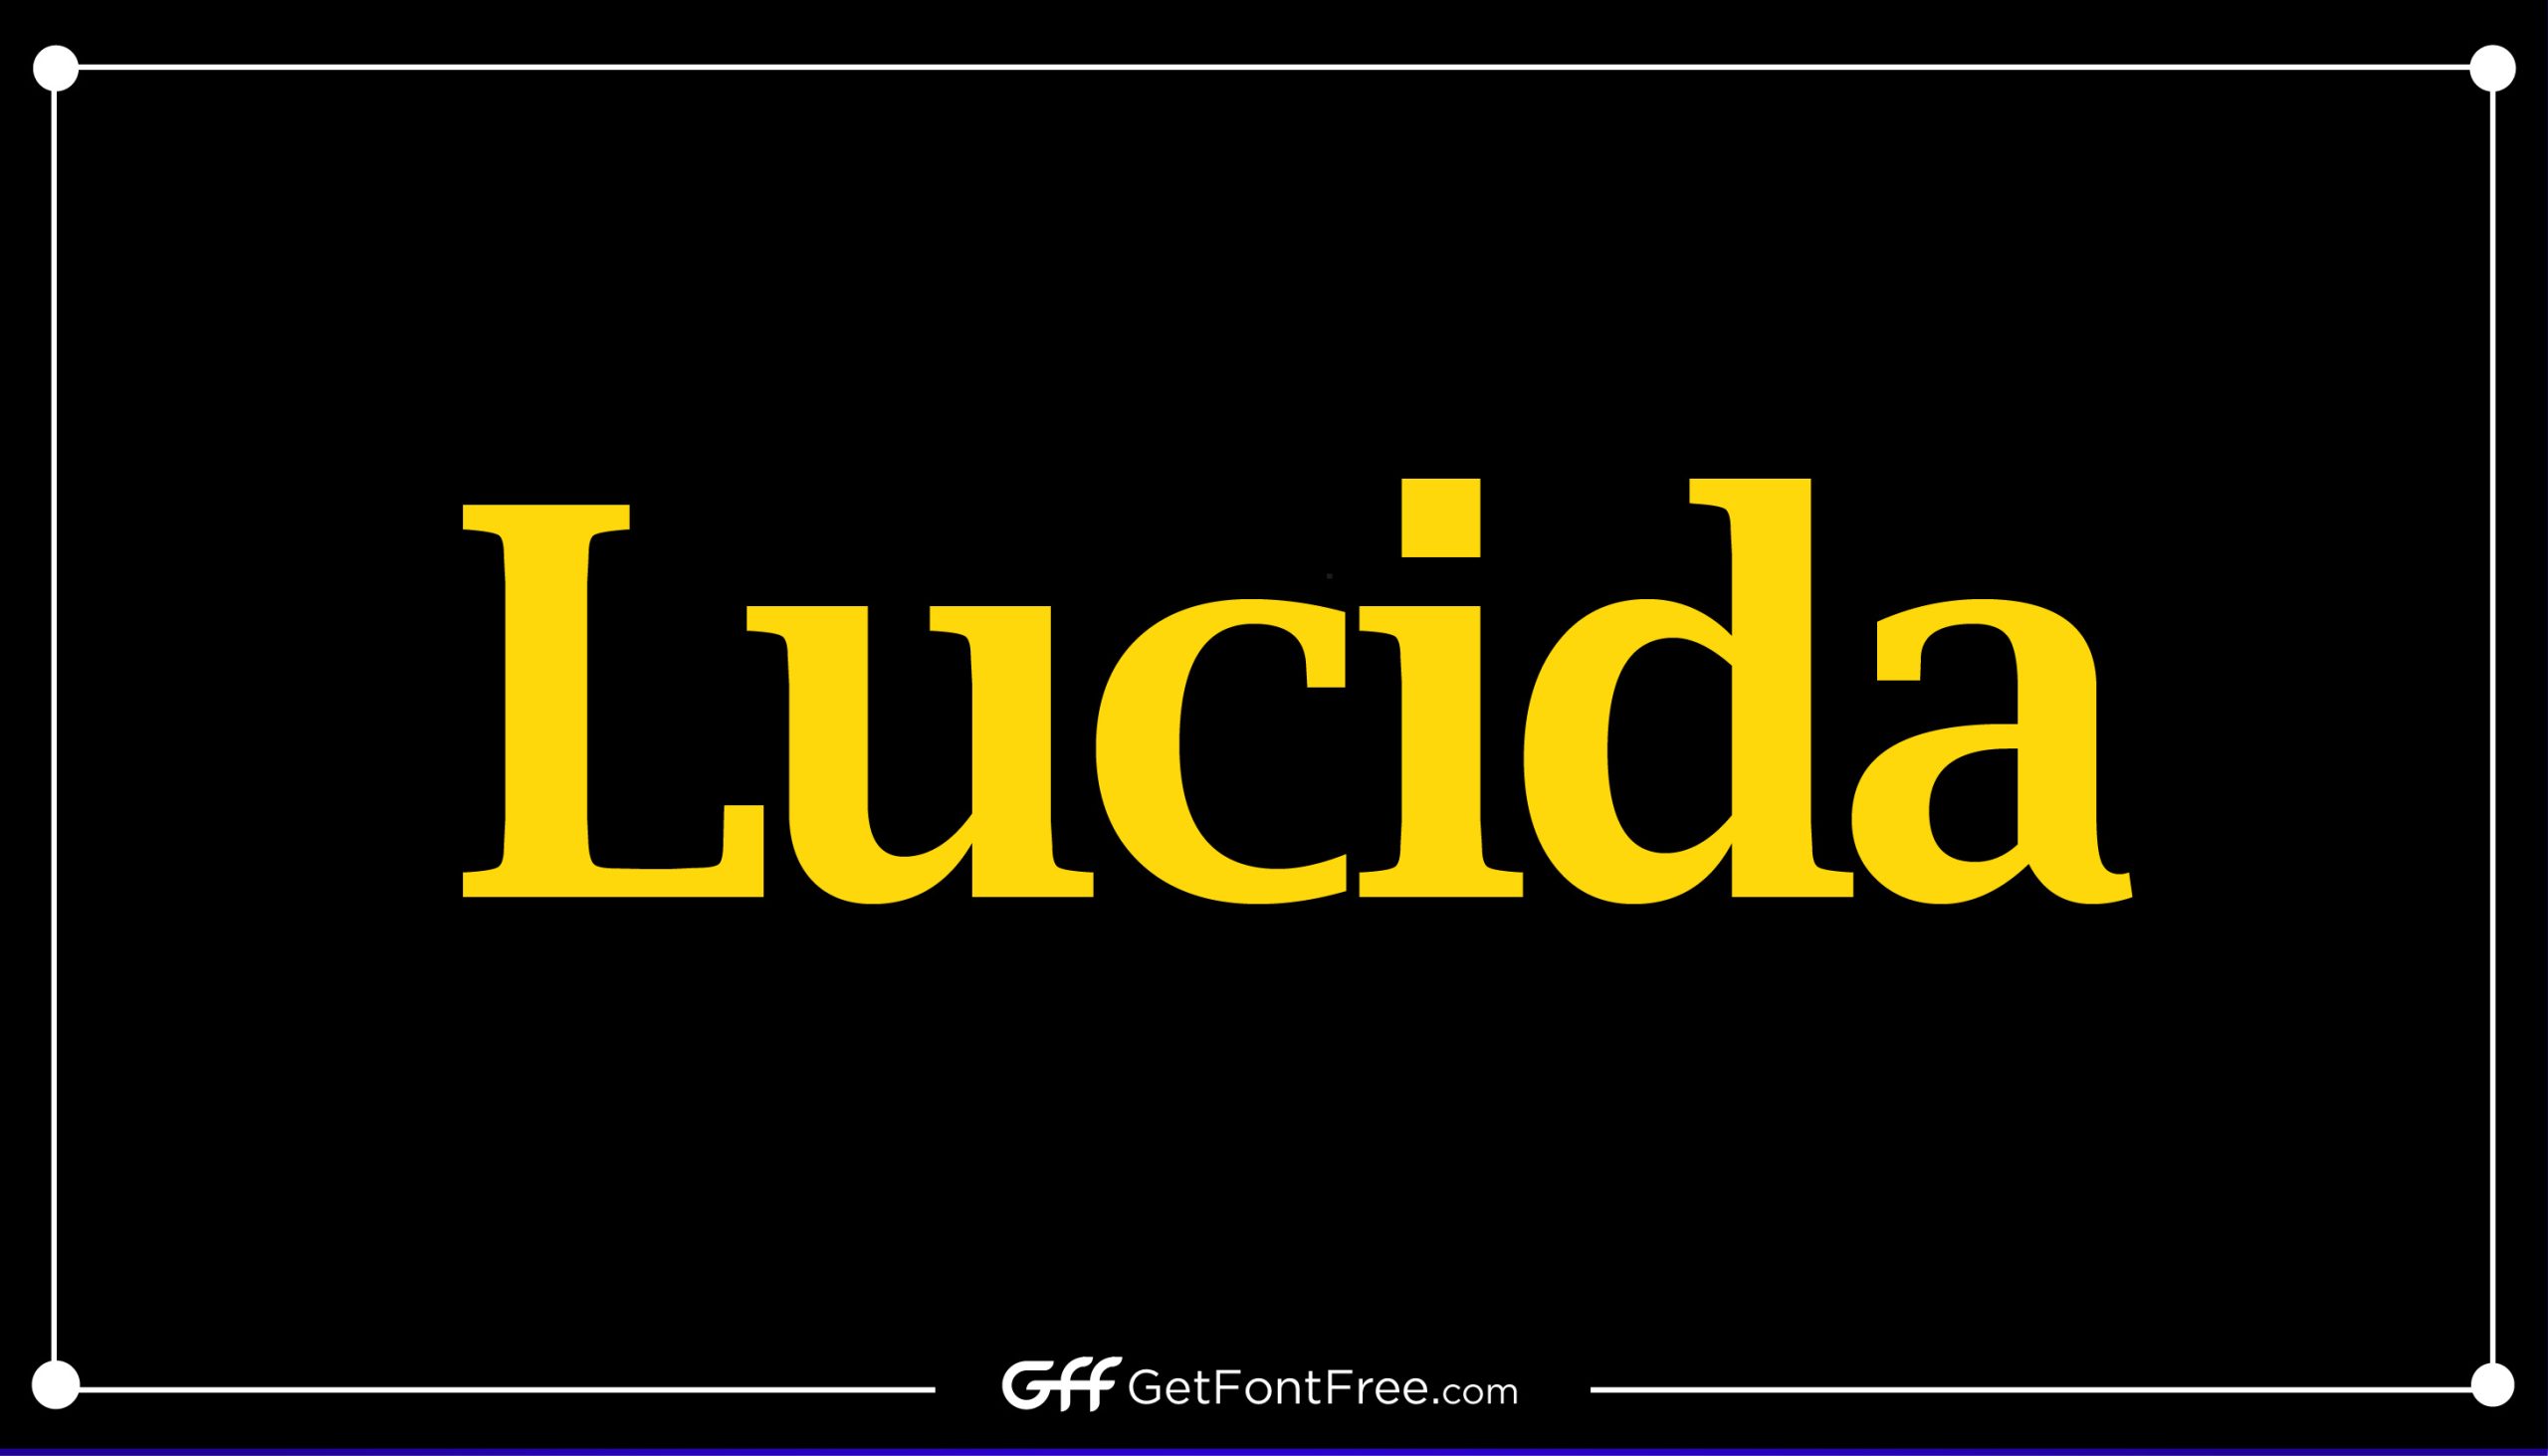 Lucida Bright Font is a serif typeface designed by Charles Bigelow and Kris Holmes in 1985. It is part of the larger Lucida font family, which was created to provide high-quality typefaces for digital printing and display. Lucida Bright is known for its clean and readable design, with a classic serif style that is both elegant and modern.